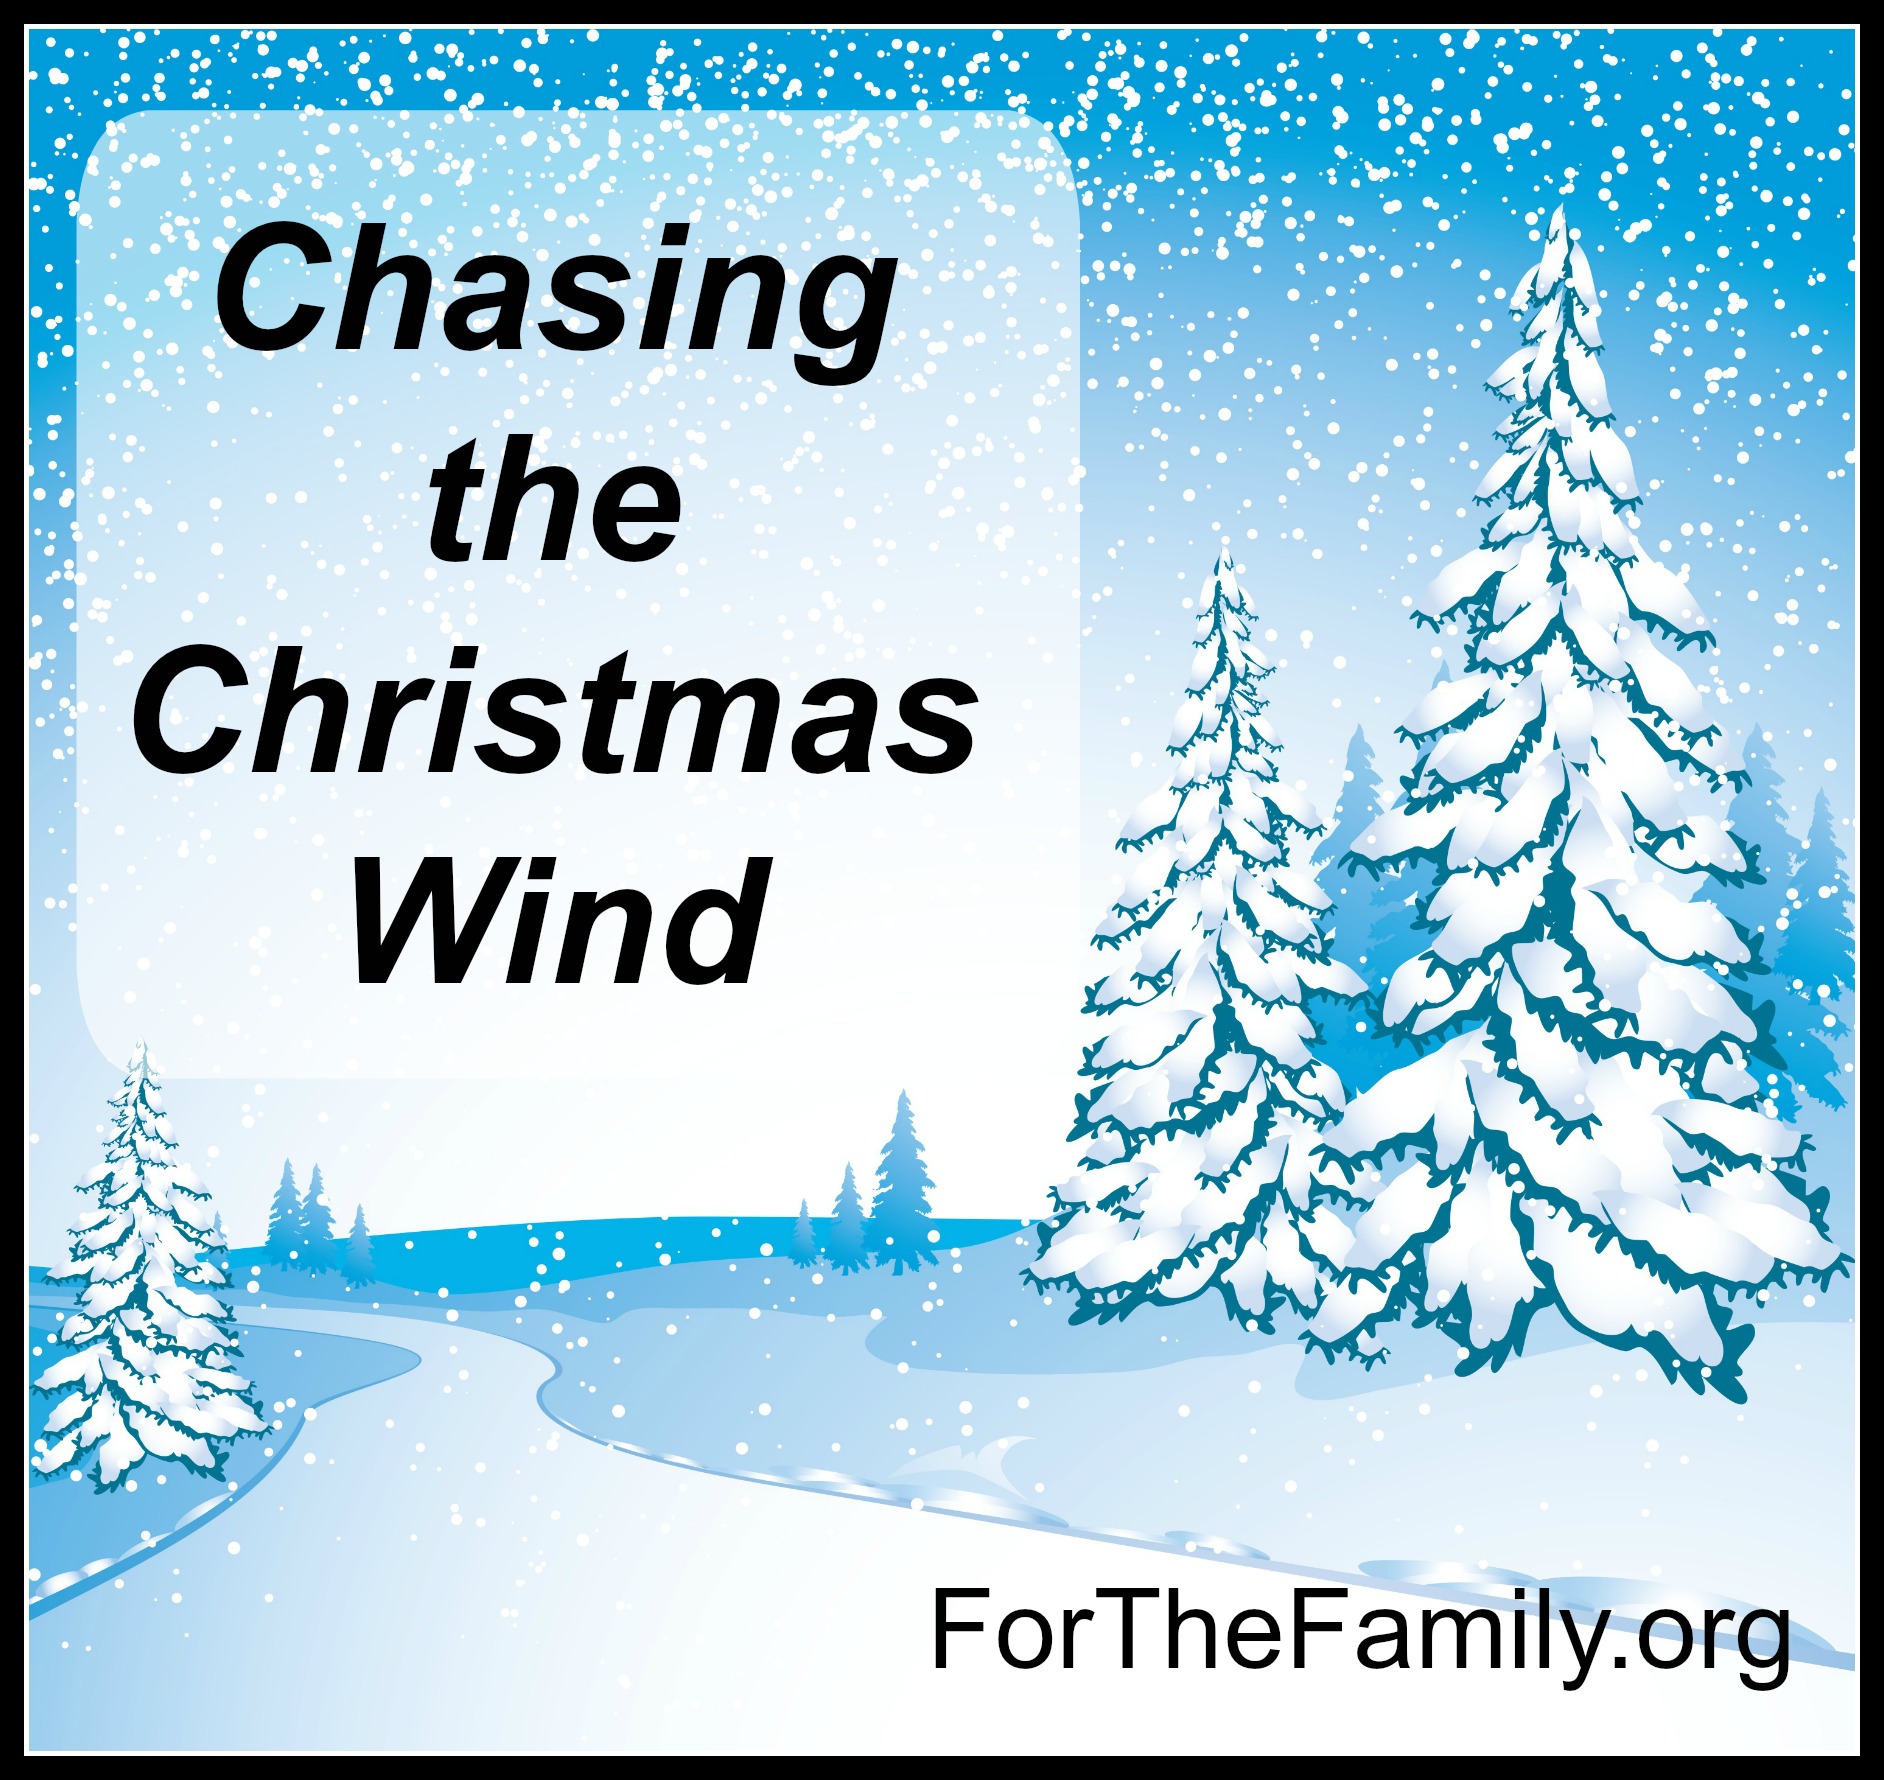 Chasing the Christmas Wind